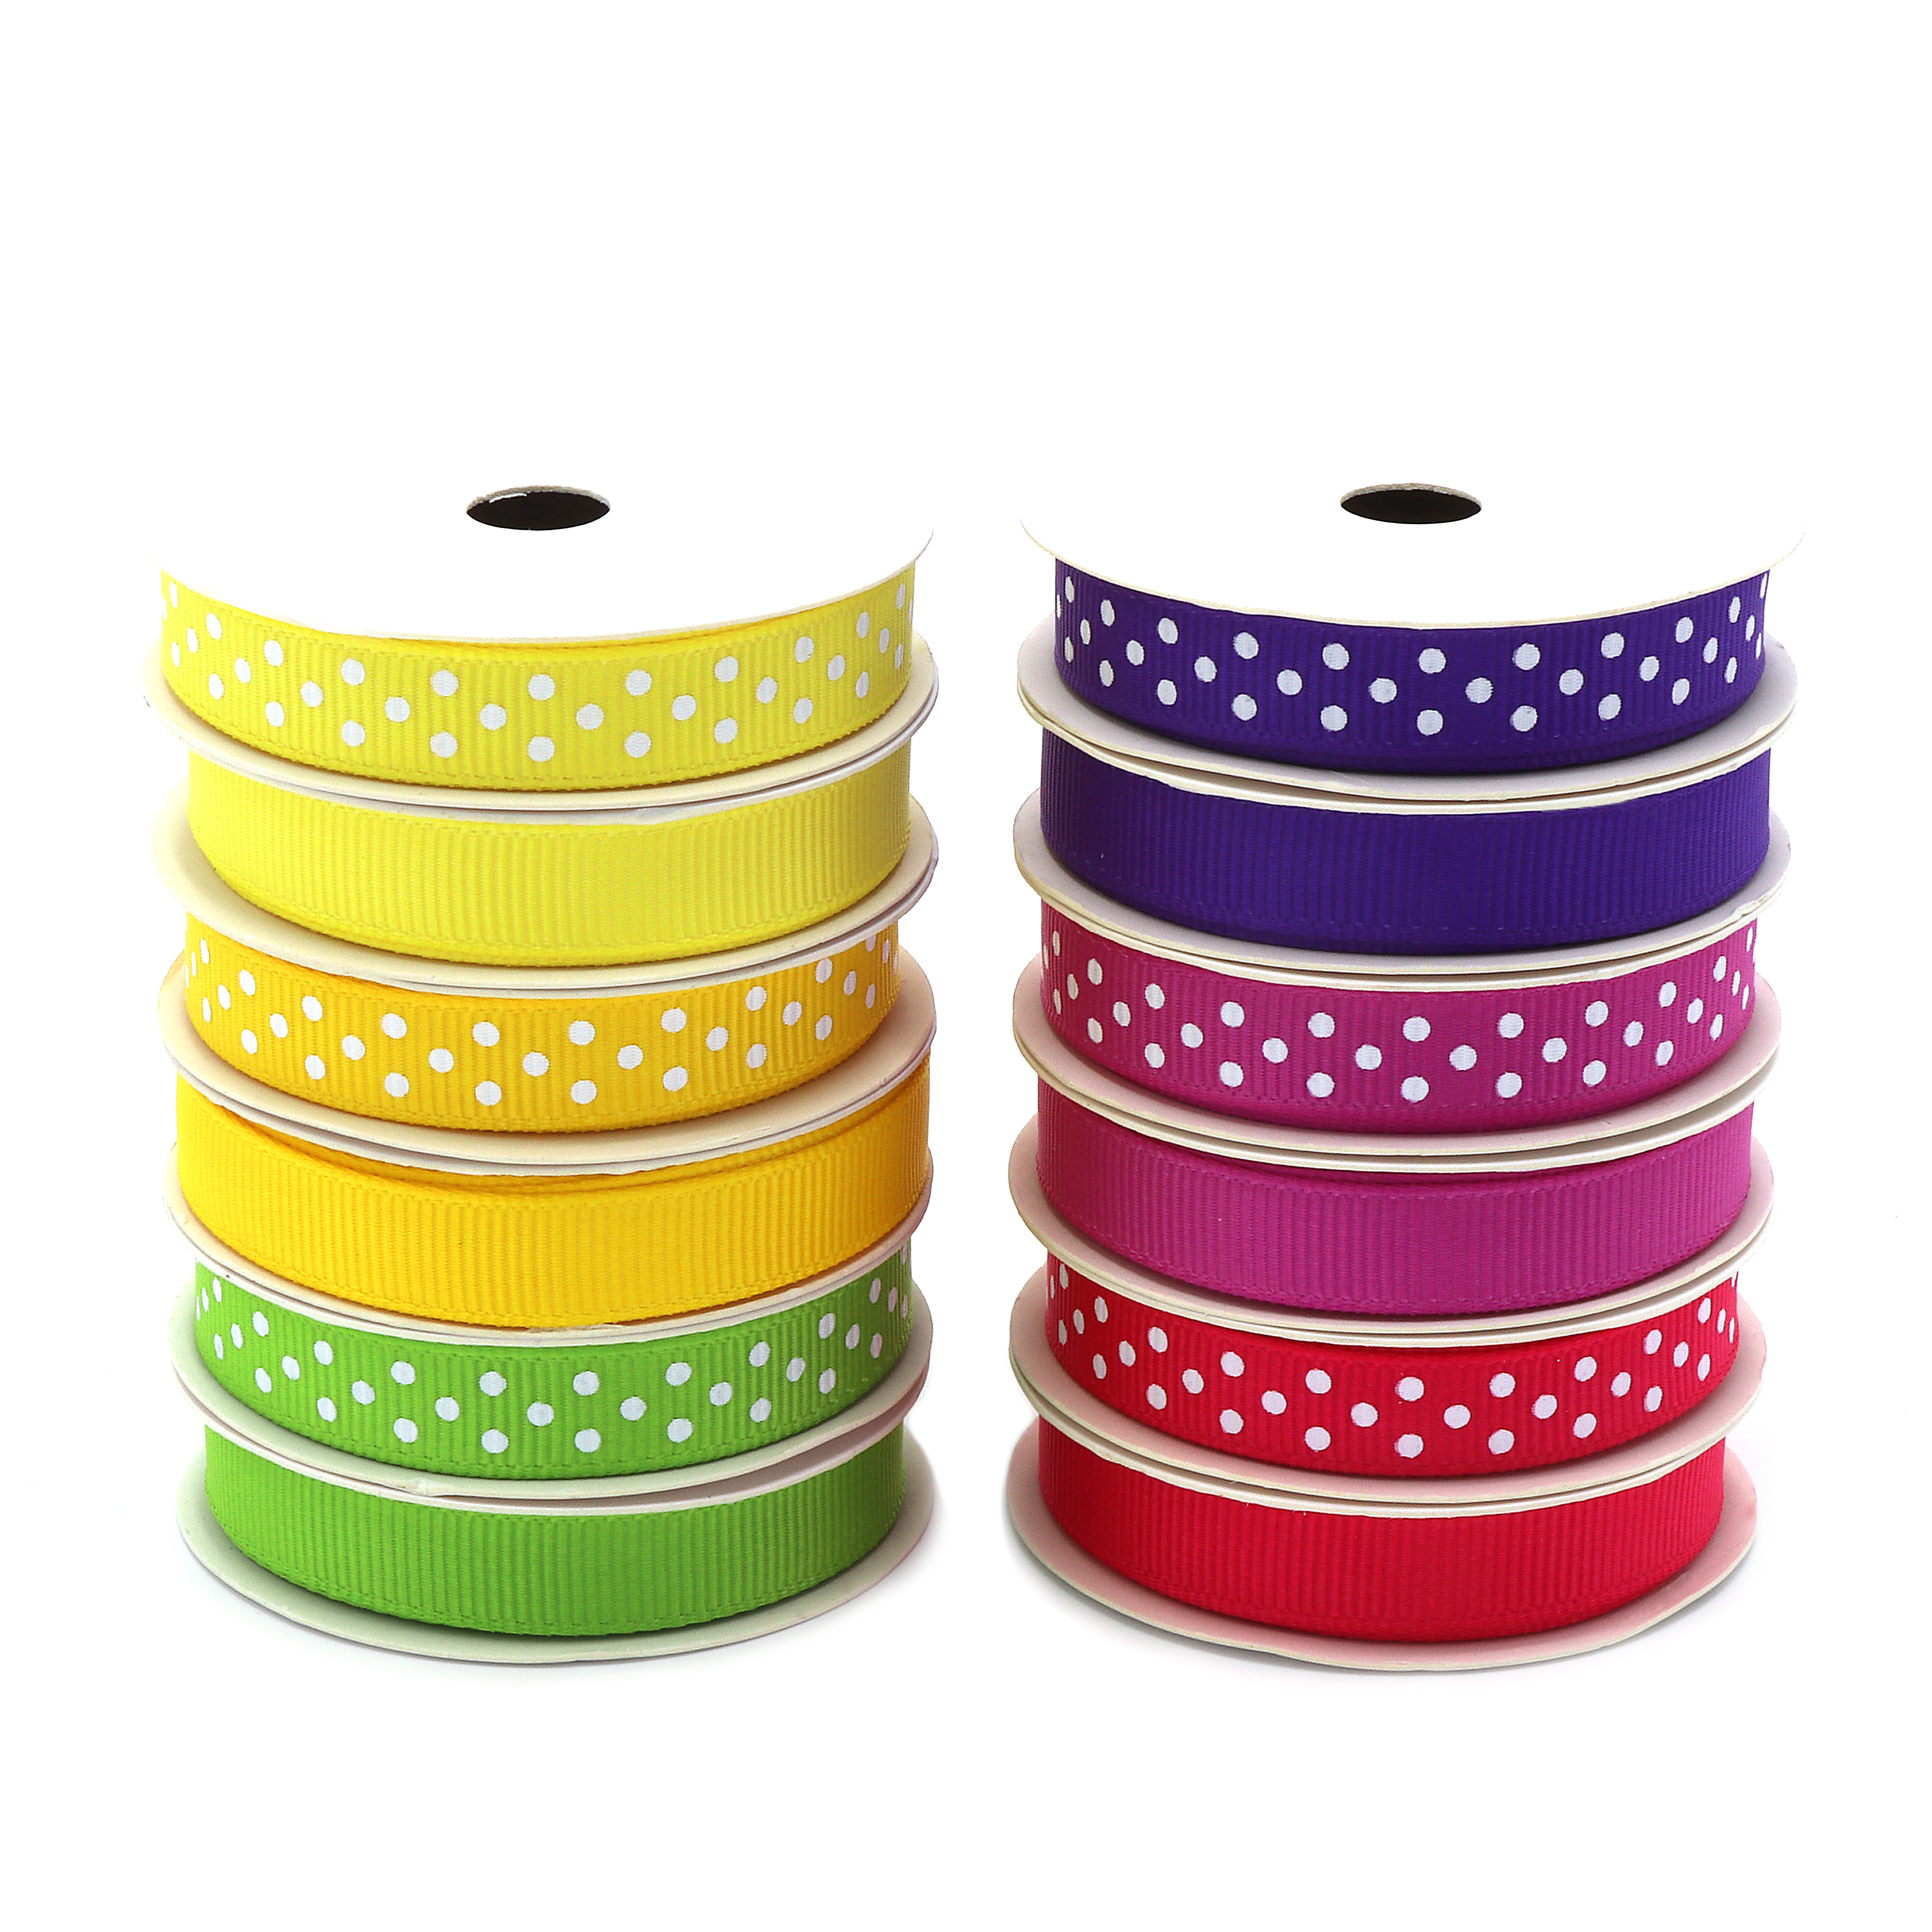 Solid and Polka Dot Grosgrain Ribbon Pack, 24 Bright Colors, 3/8" x 48 Yards by Gwen Studios - image 2 of 7